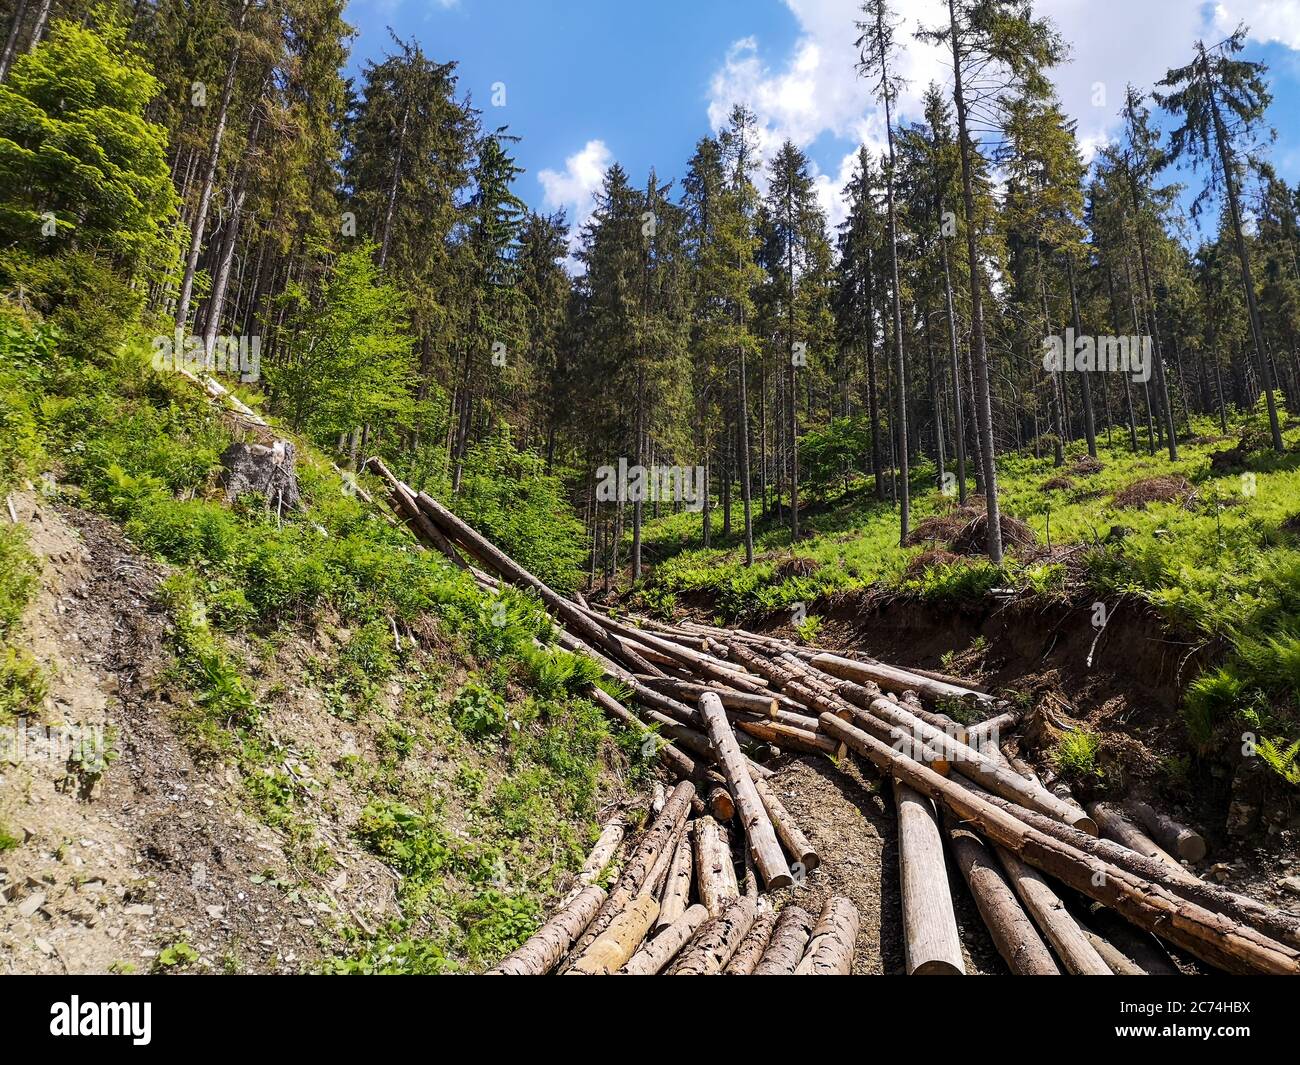 Spruce timber logging area high in the Carpathian mountains. Pile of cut pine logs bounding down the side of the hills like a stream. Stock Photo